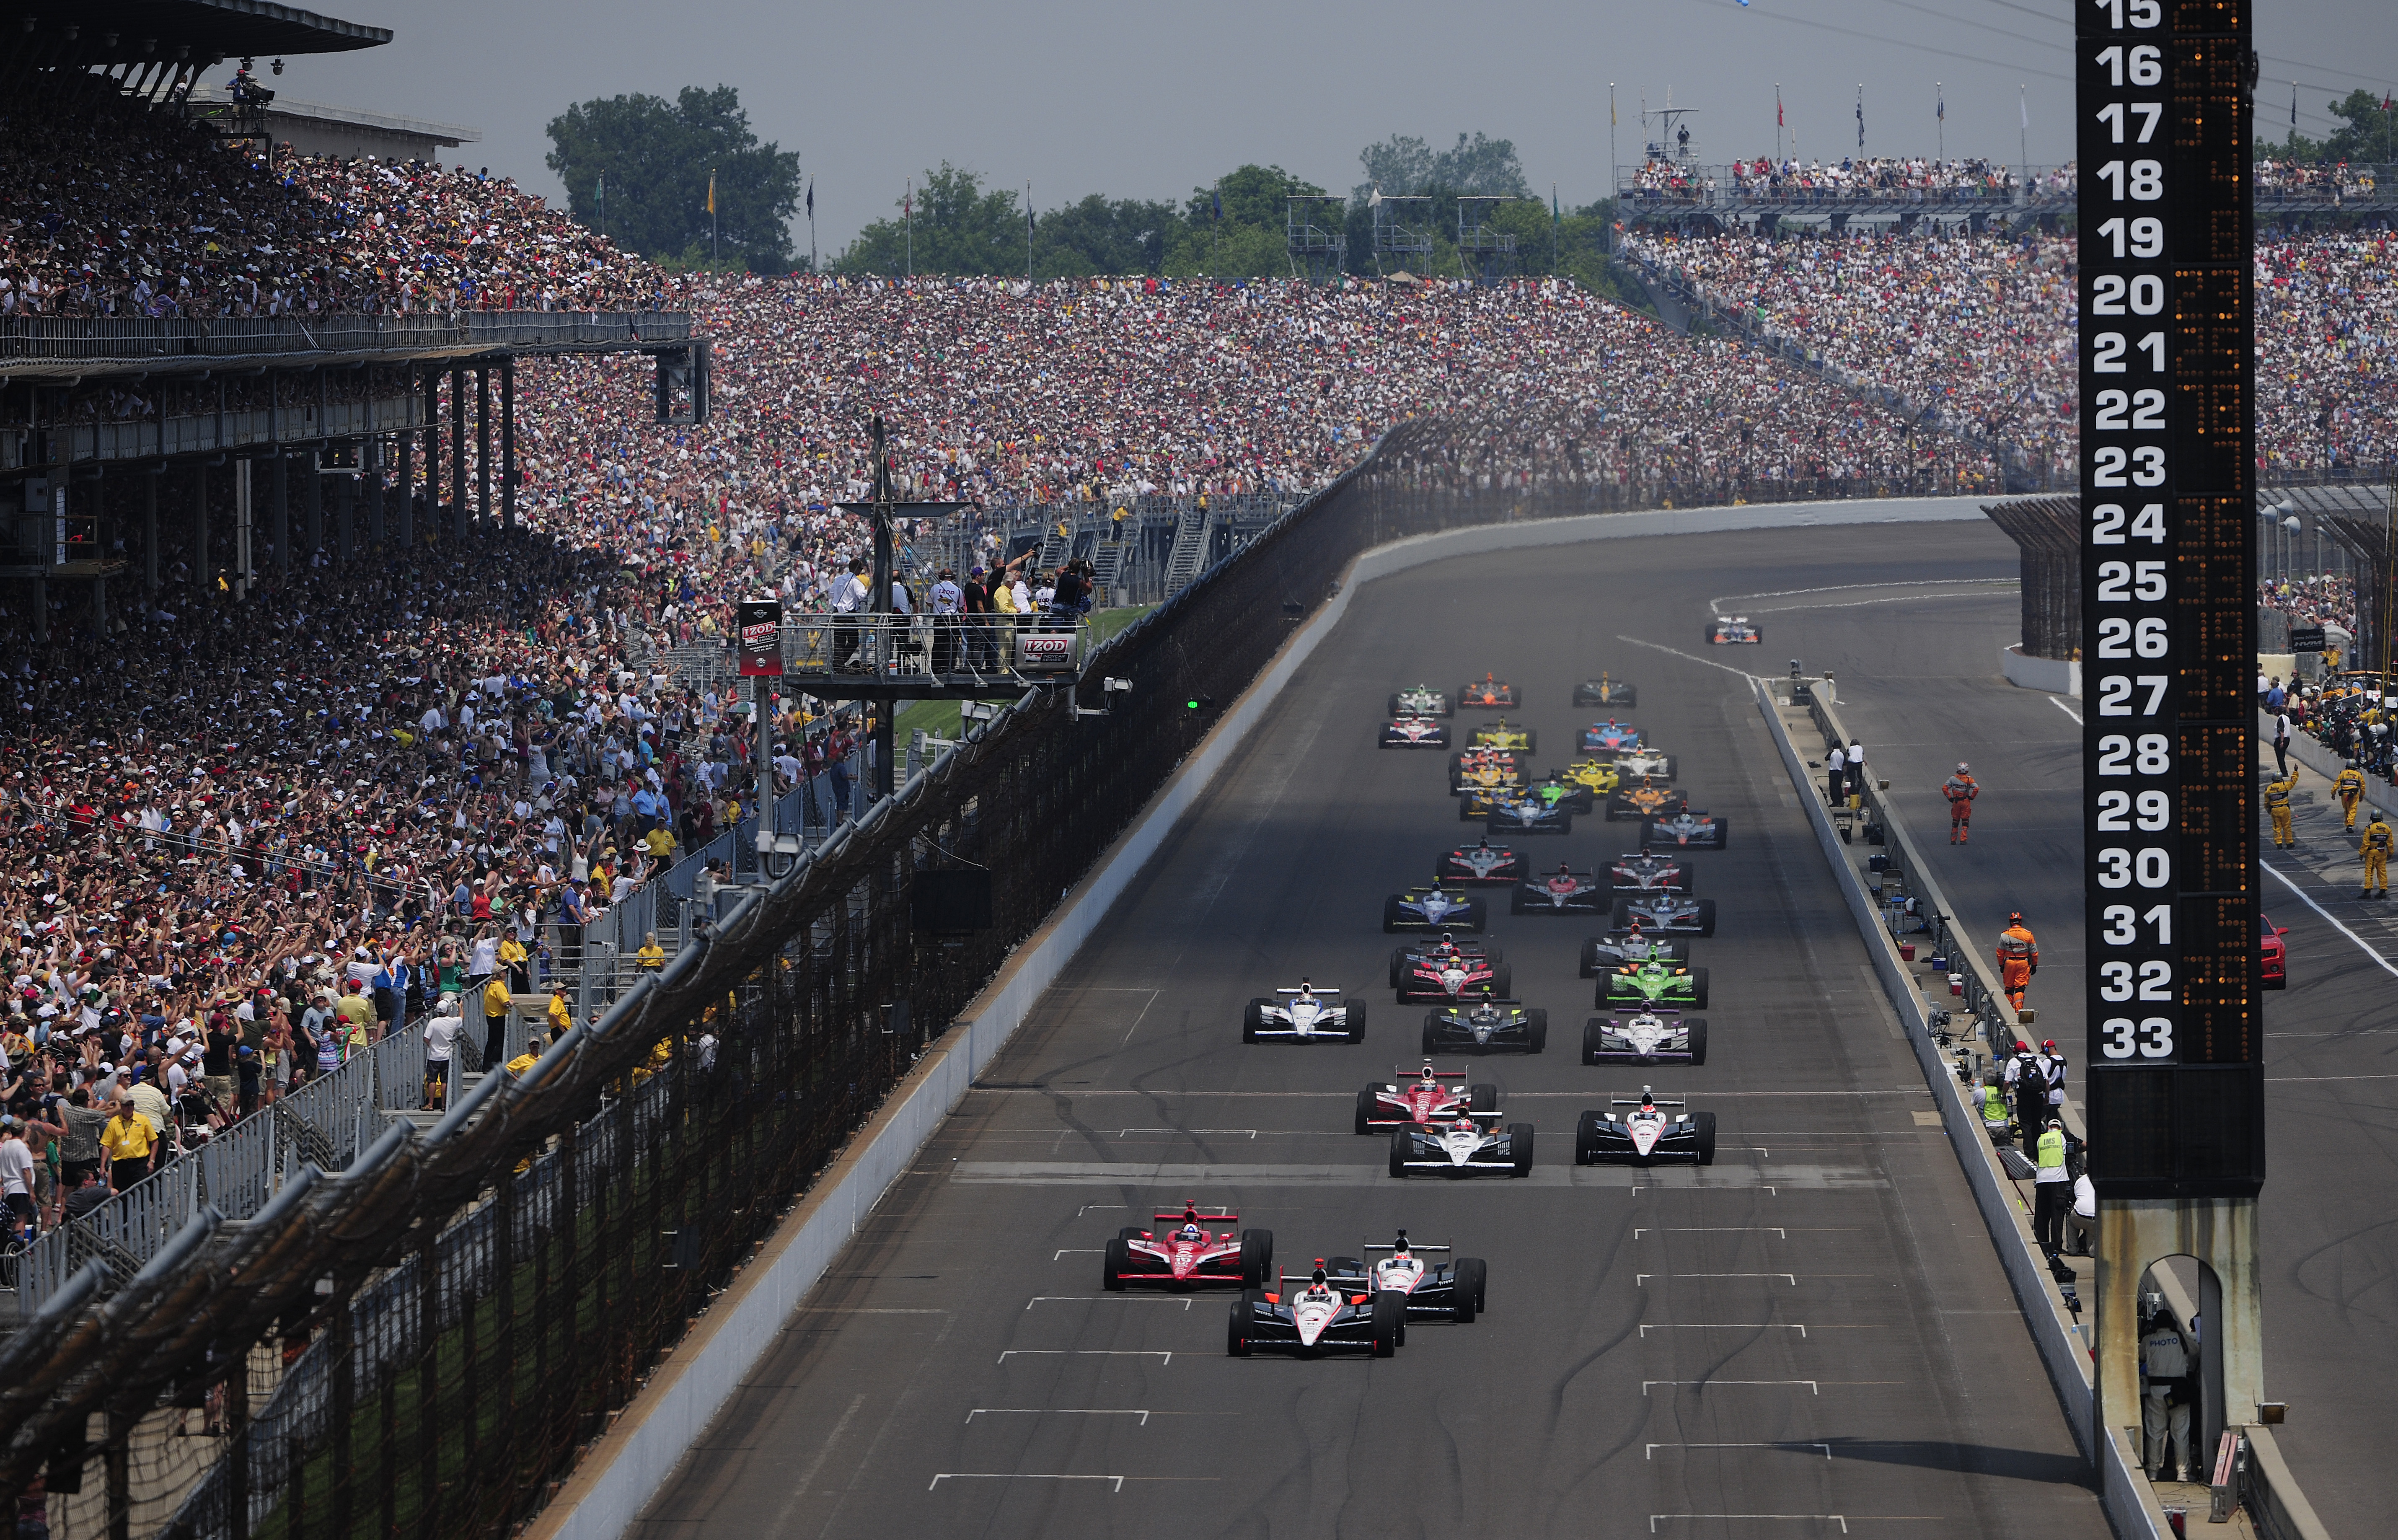 INDIANAPOLIS - MAY 30:  Helio Castroneves of Brazil, driver of the #3 Team Penske Dallara Honda, leads the field at the start of the IZOD IndyCar Series 94th running of the Indianapolis 500 at the Indianapolis Motor Speedway on May 30, 2010 in Indianapoli